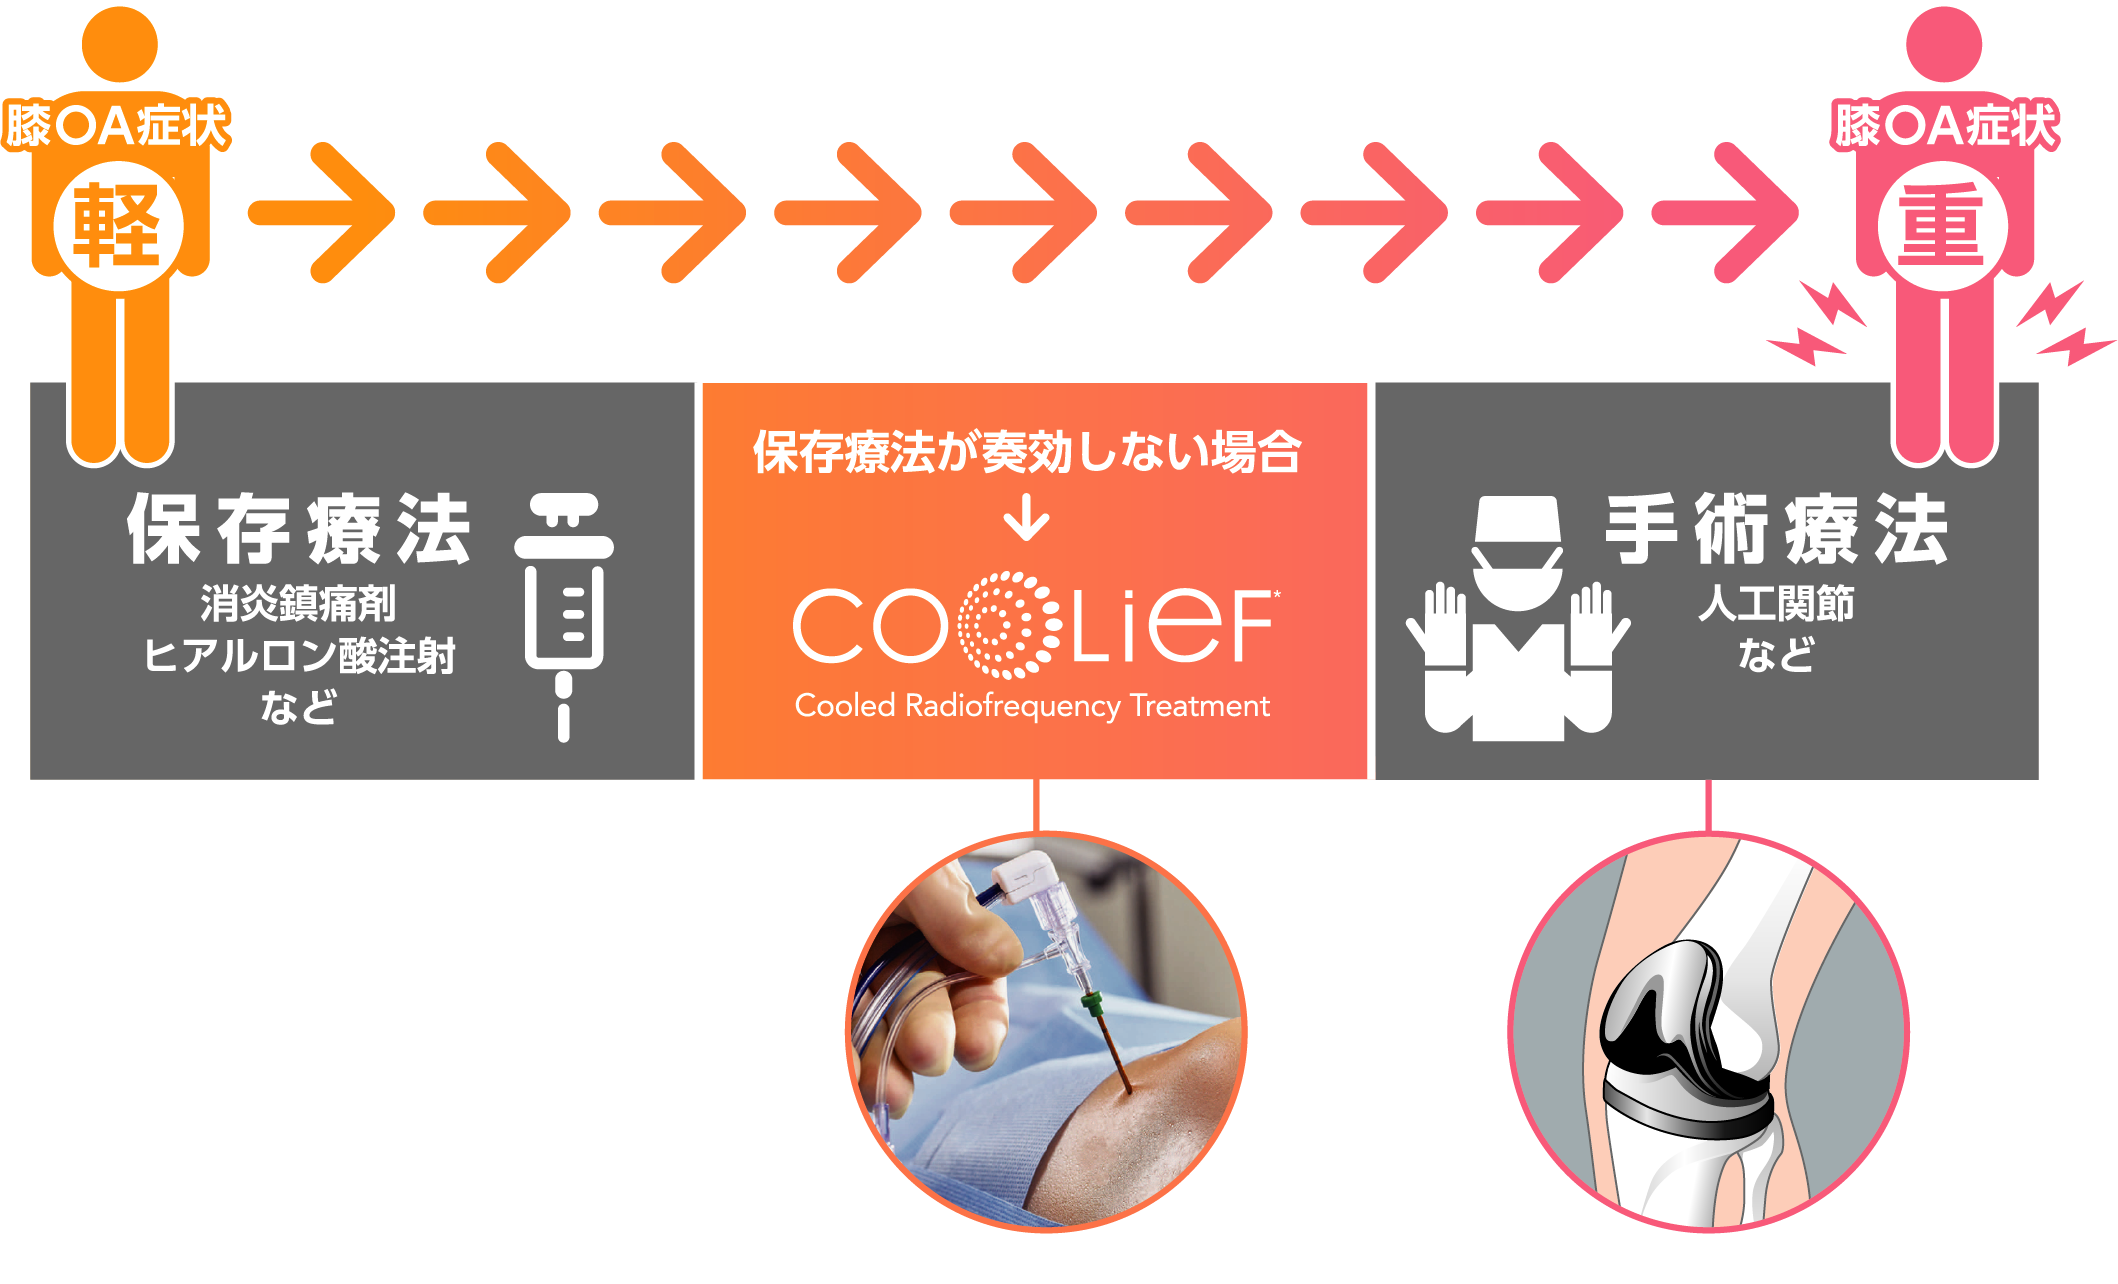 Coolief 治療の選択